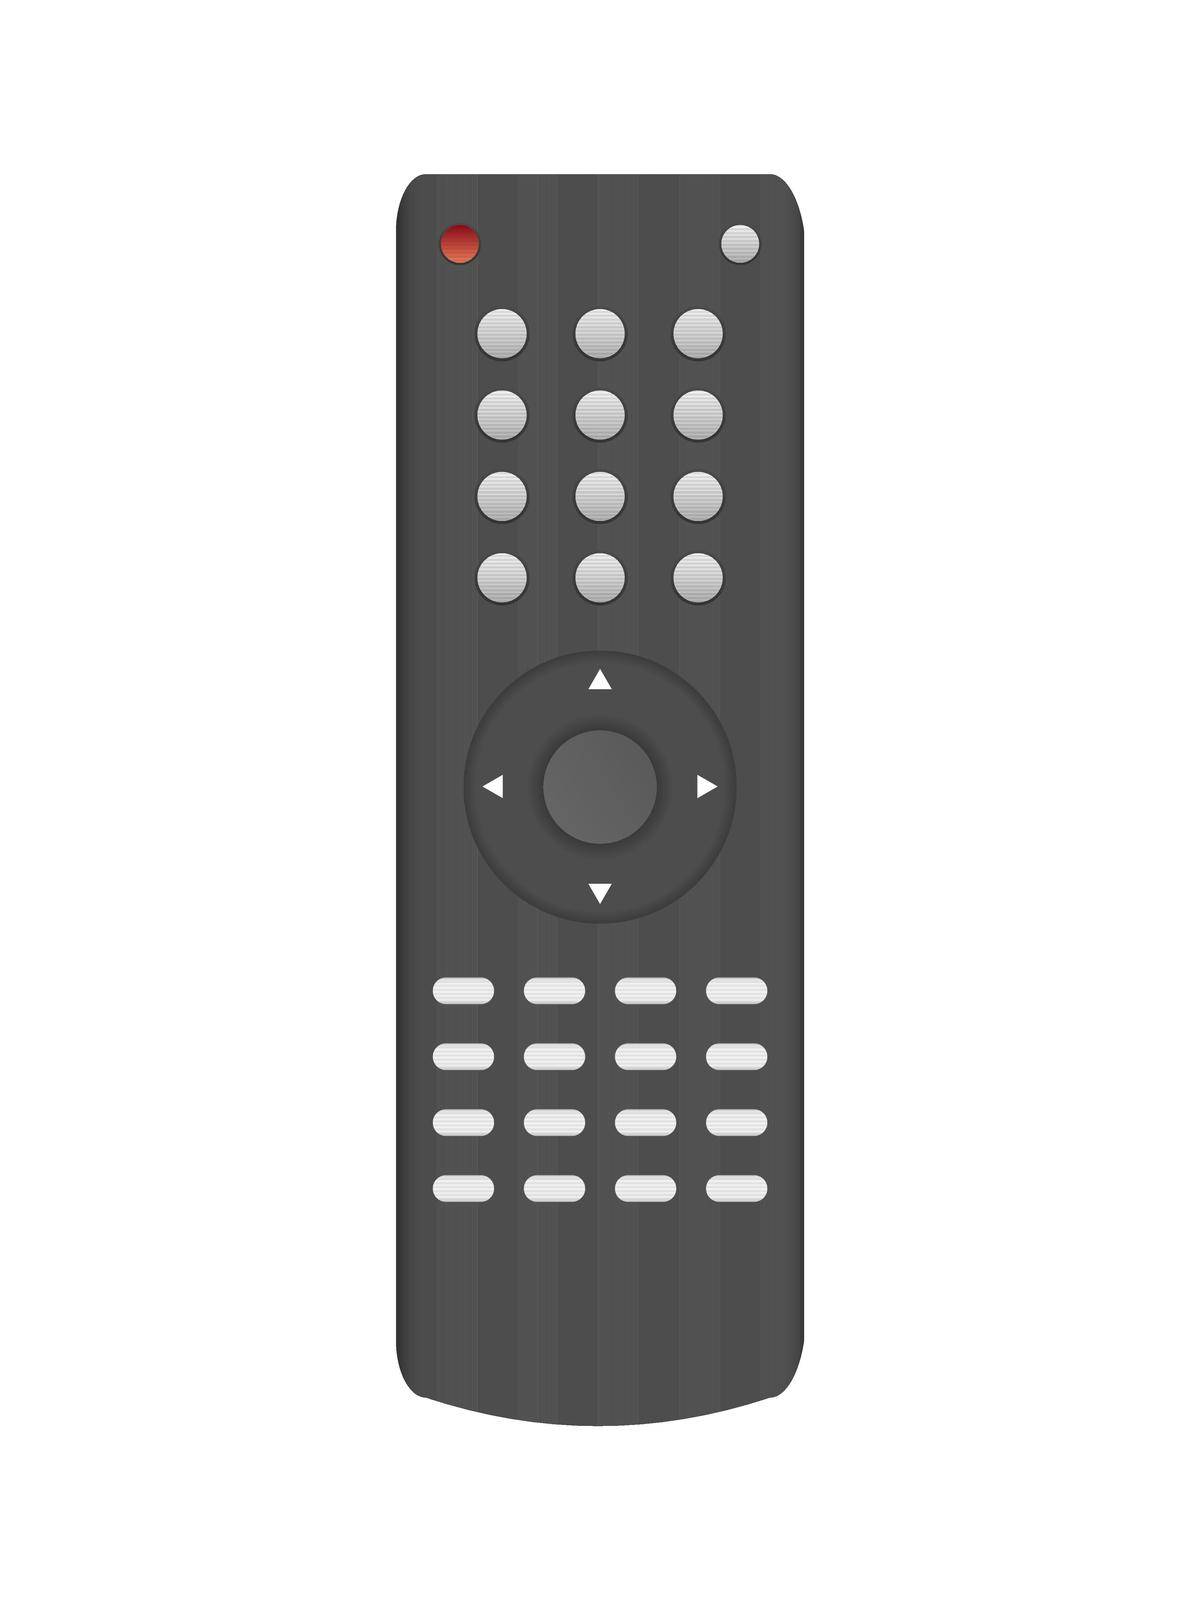 Black TV remote control 3d. Realistic remote control vector. Isolated on white background. by Javvani